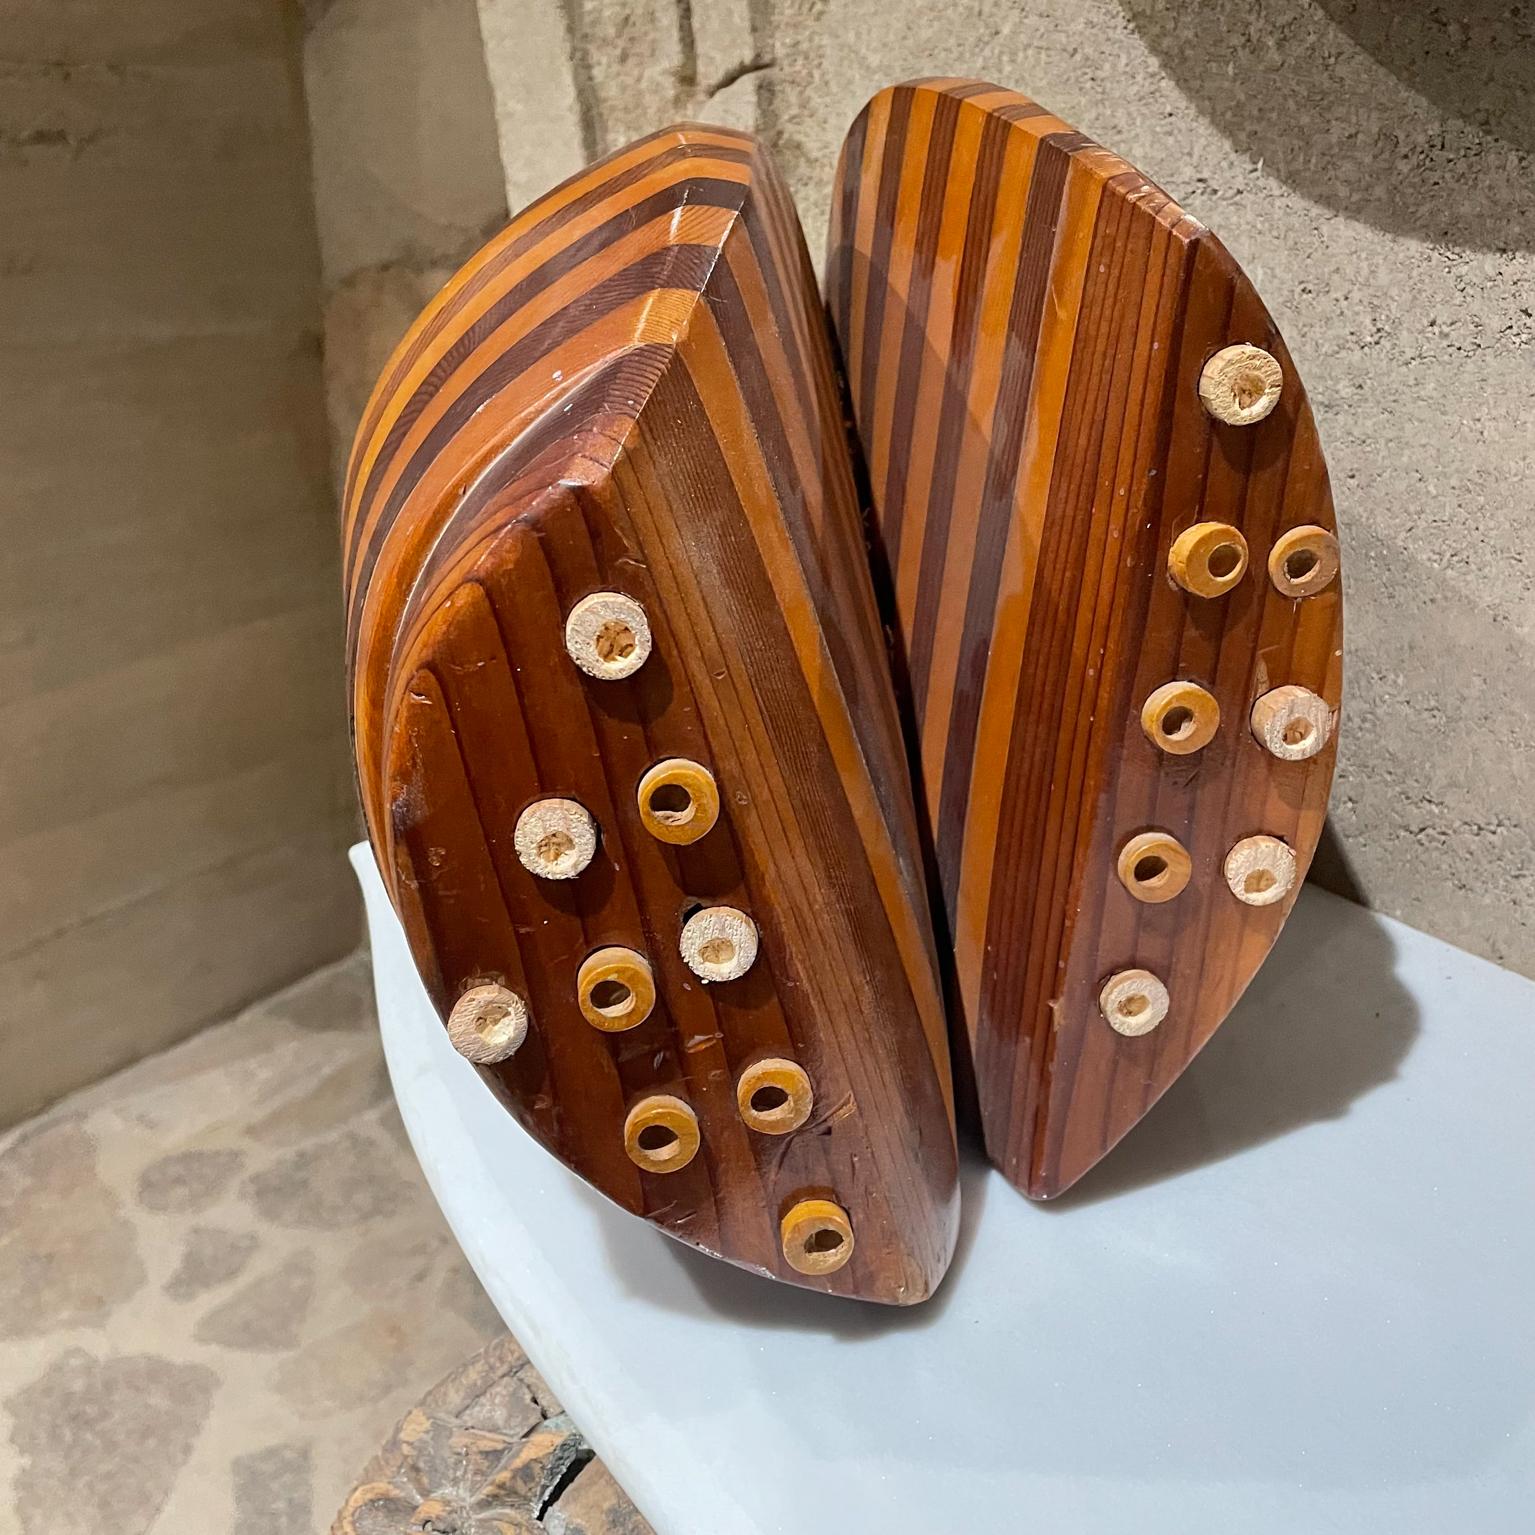 1970s Striped Wood Art Abstract Sculpture Organic Modern Design In Good Condition For Sale In Chula Vista, CA